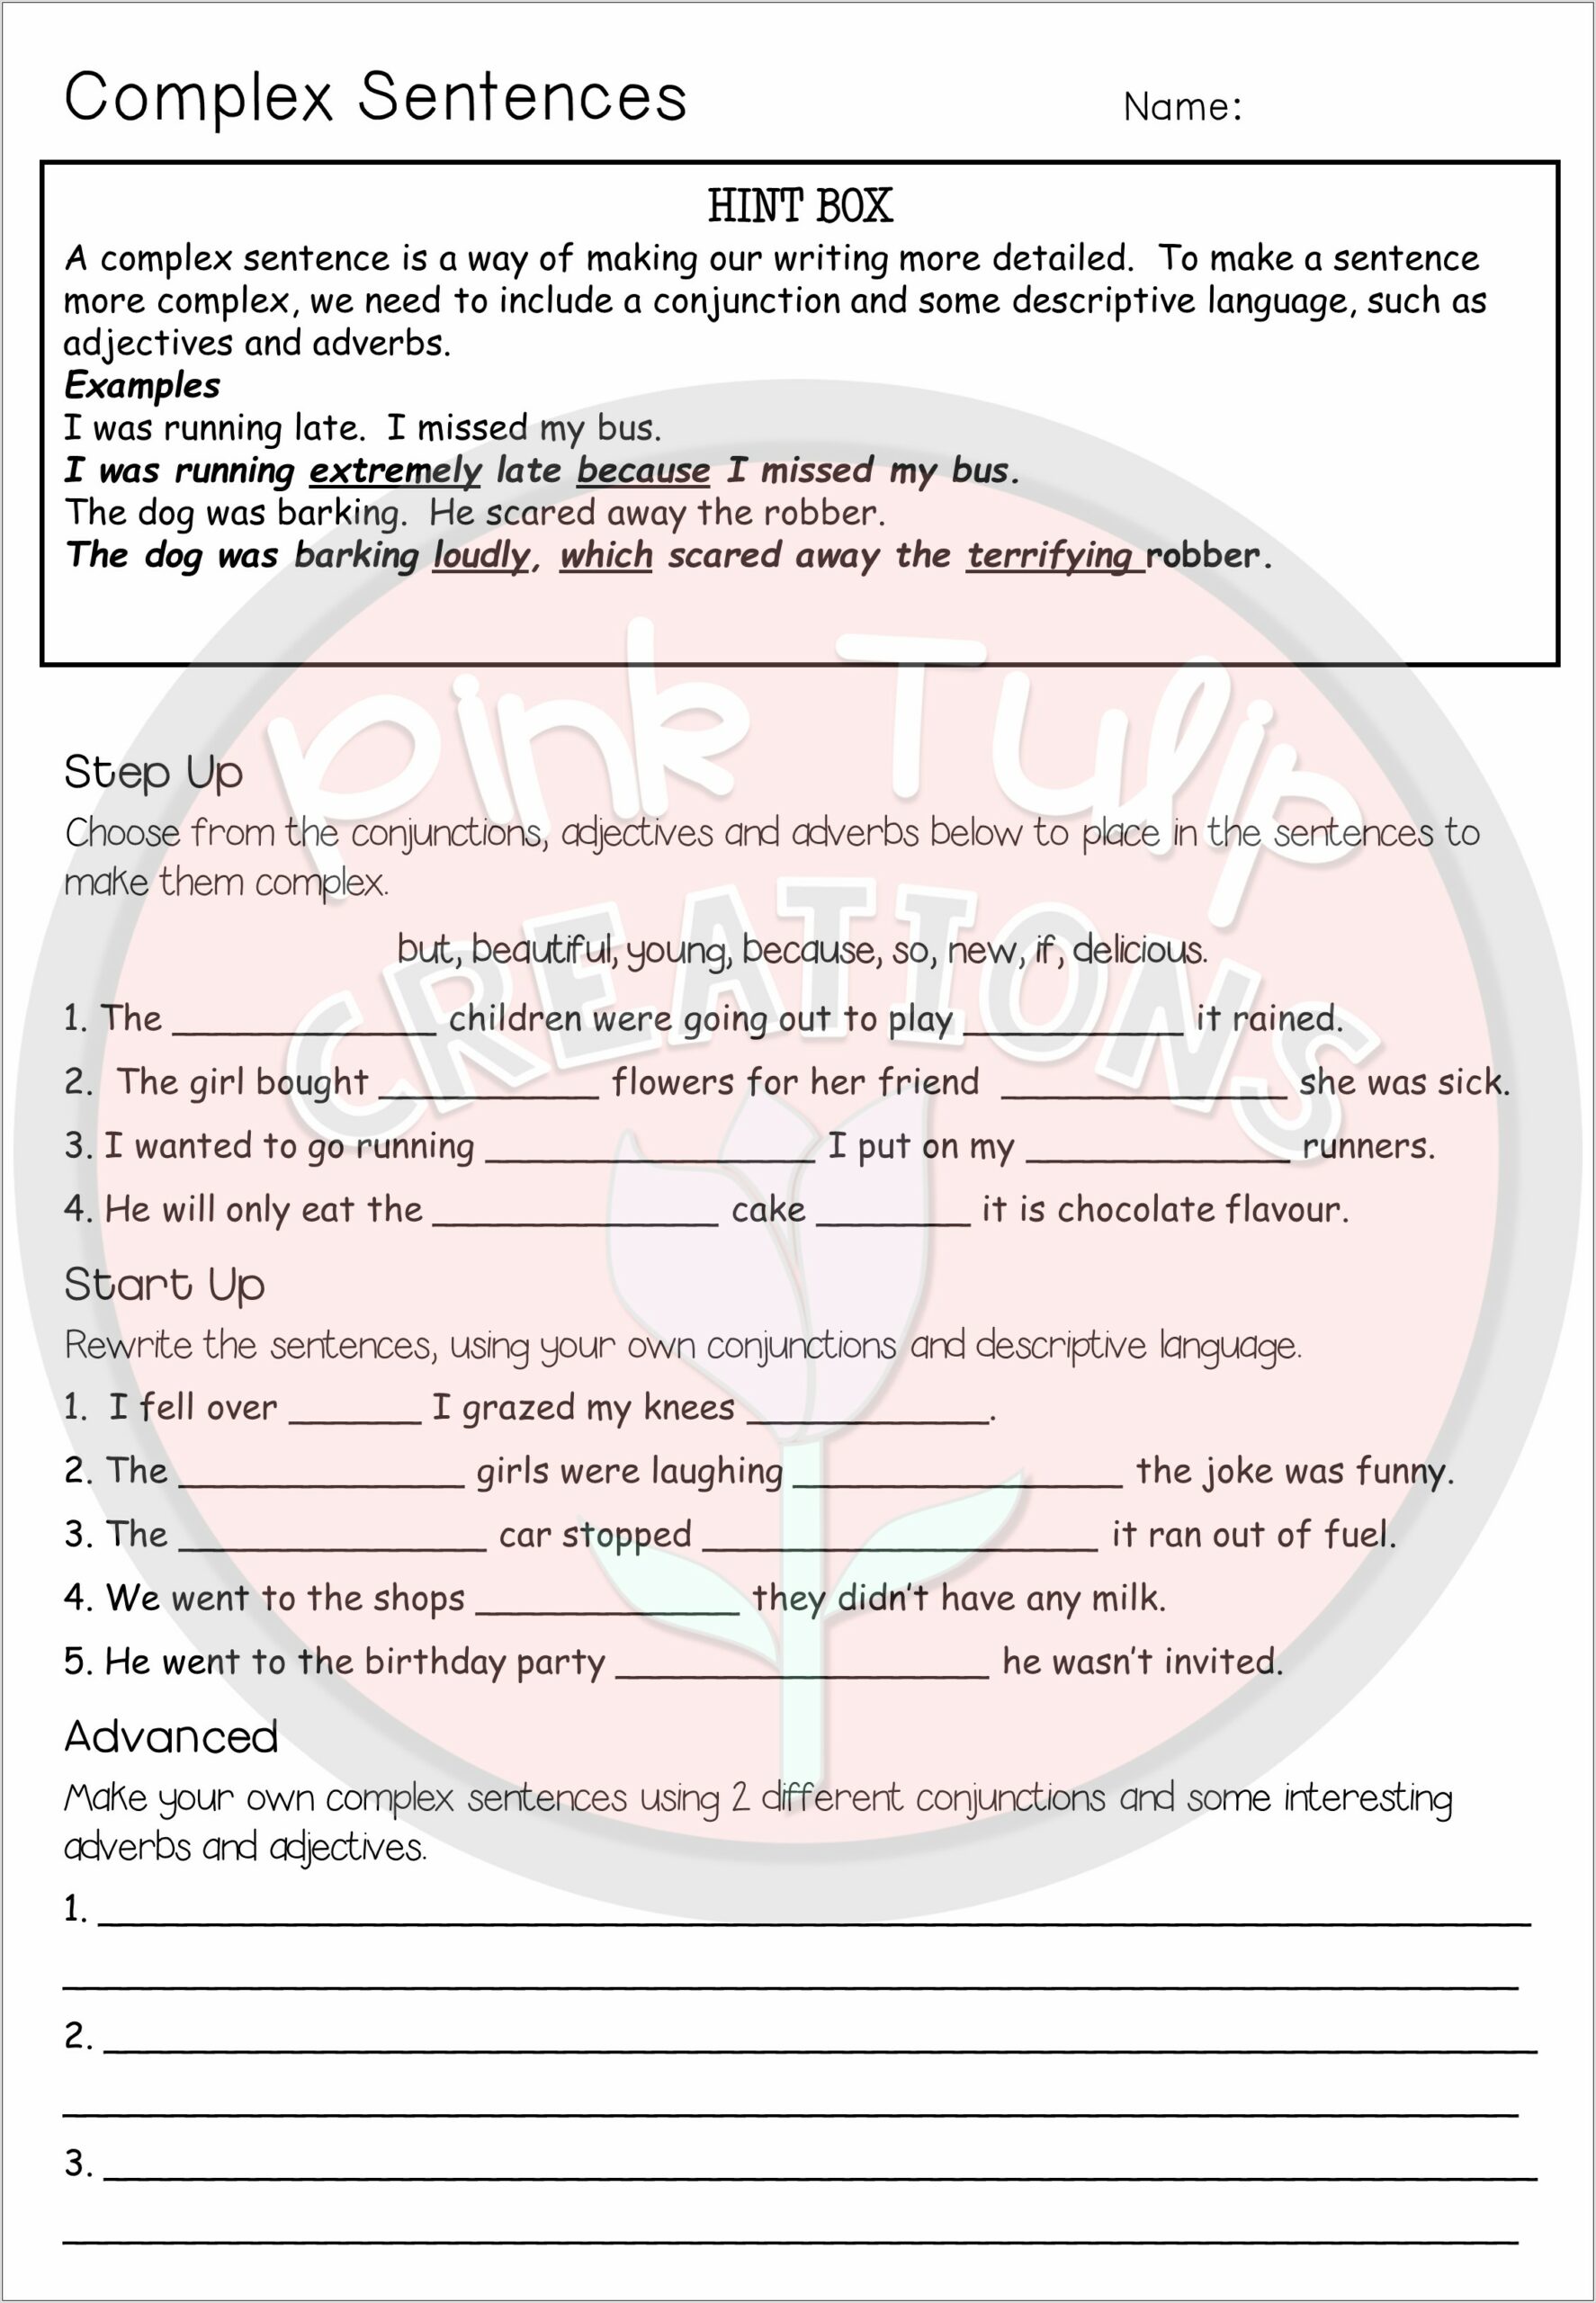 Writing Complex Sentences Worksheet Answers